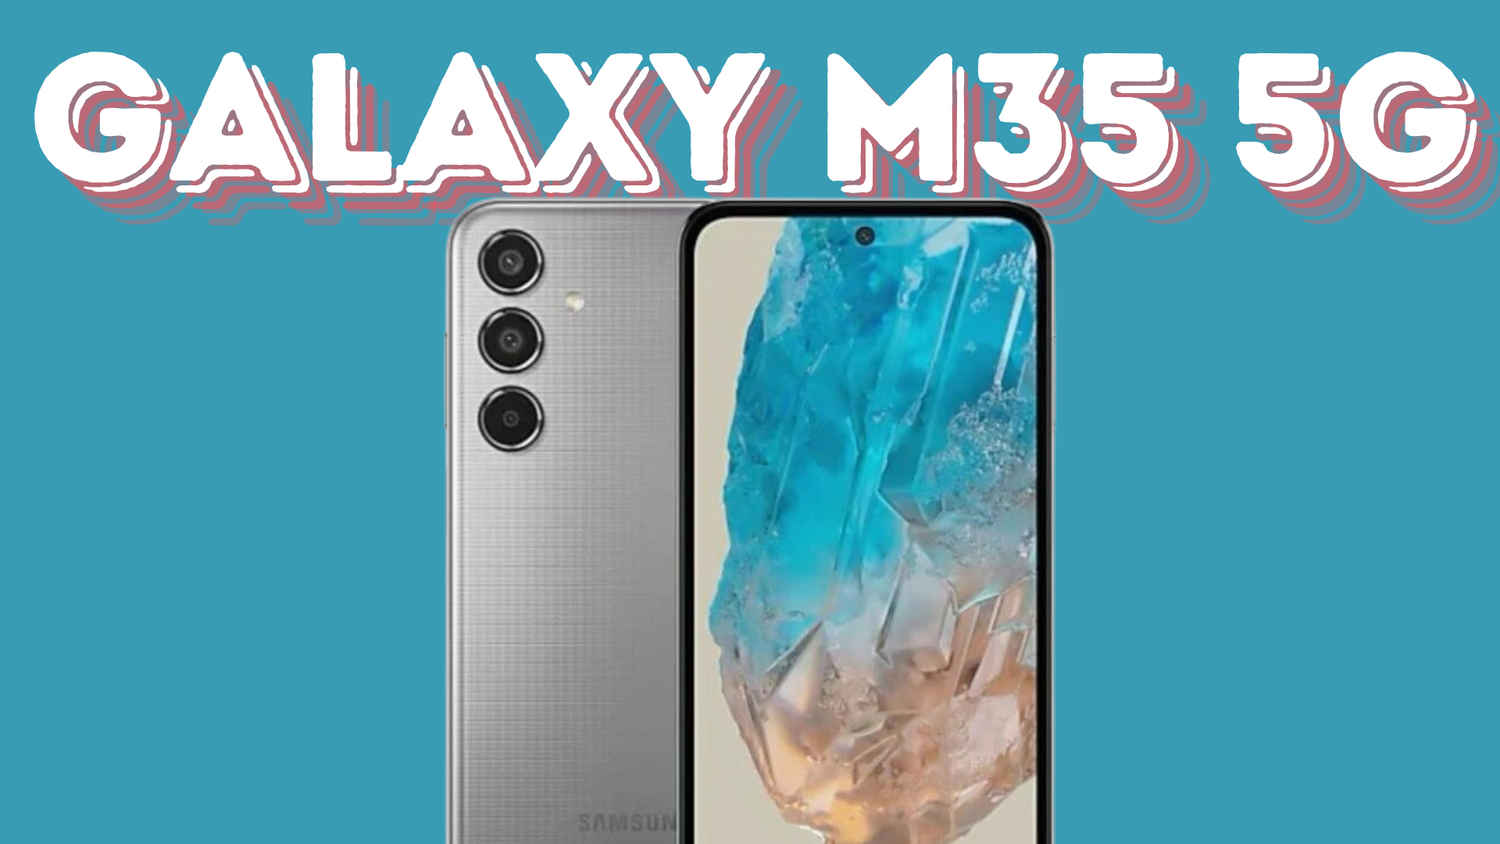 Samsung Galaxy M35 5G launched in India: Price, specifications, and more